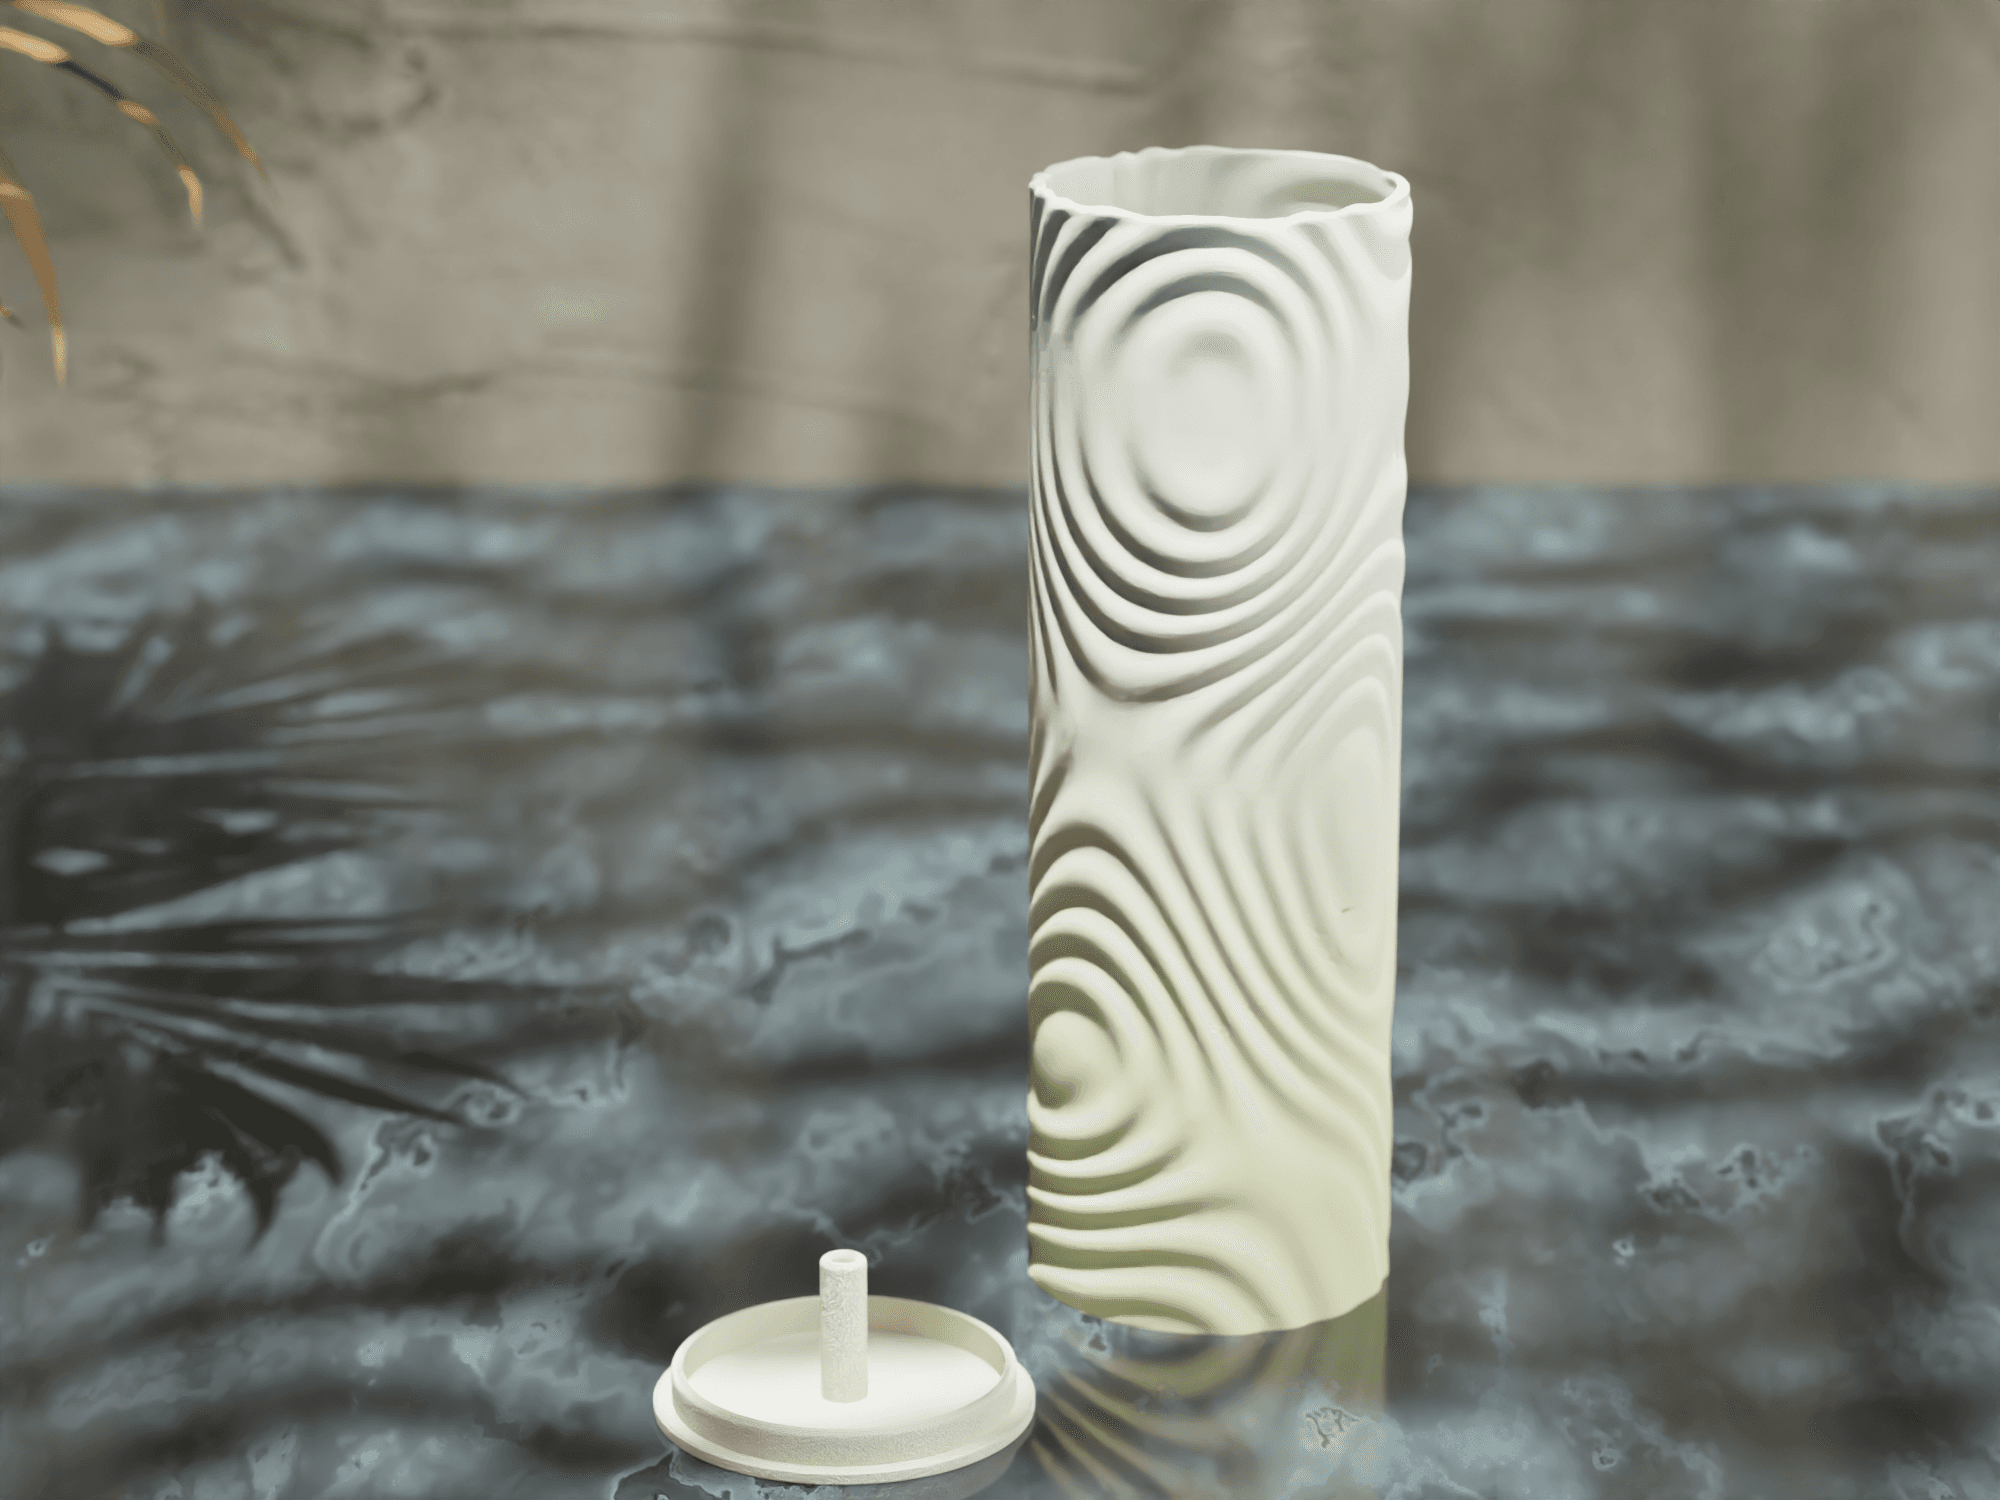 Waveform Incense Holder: A Minimalist Accent for Your Space 3d model